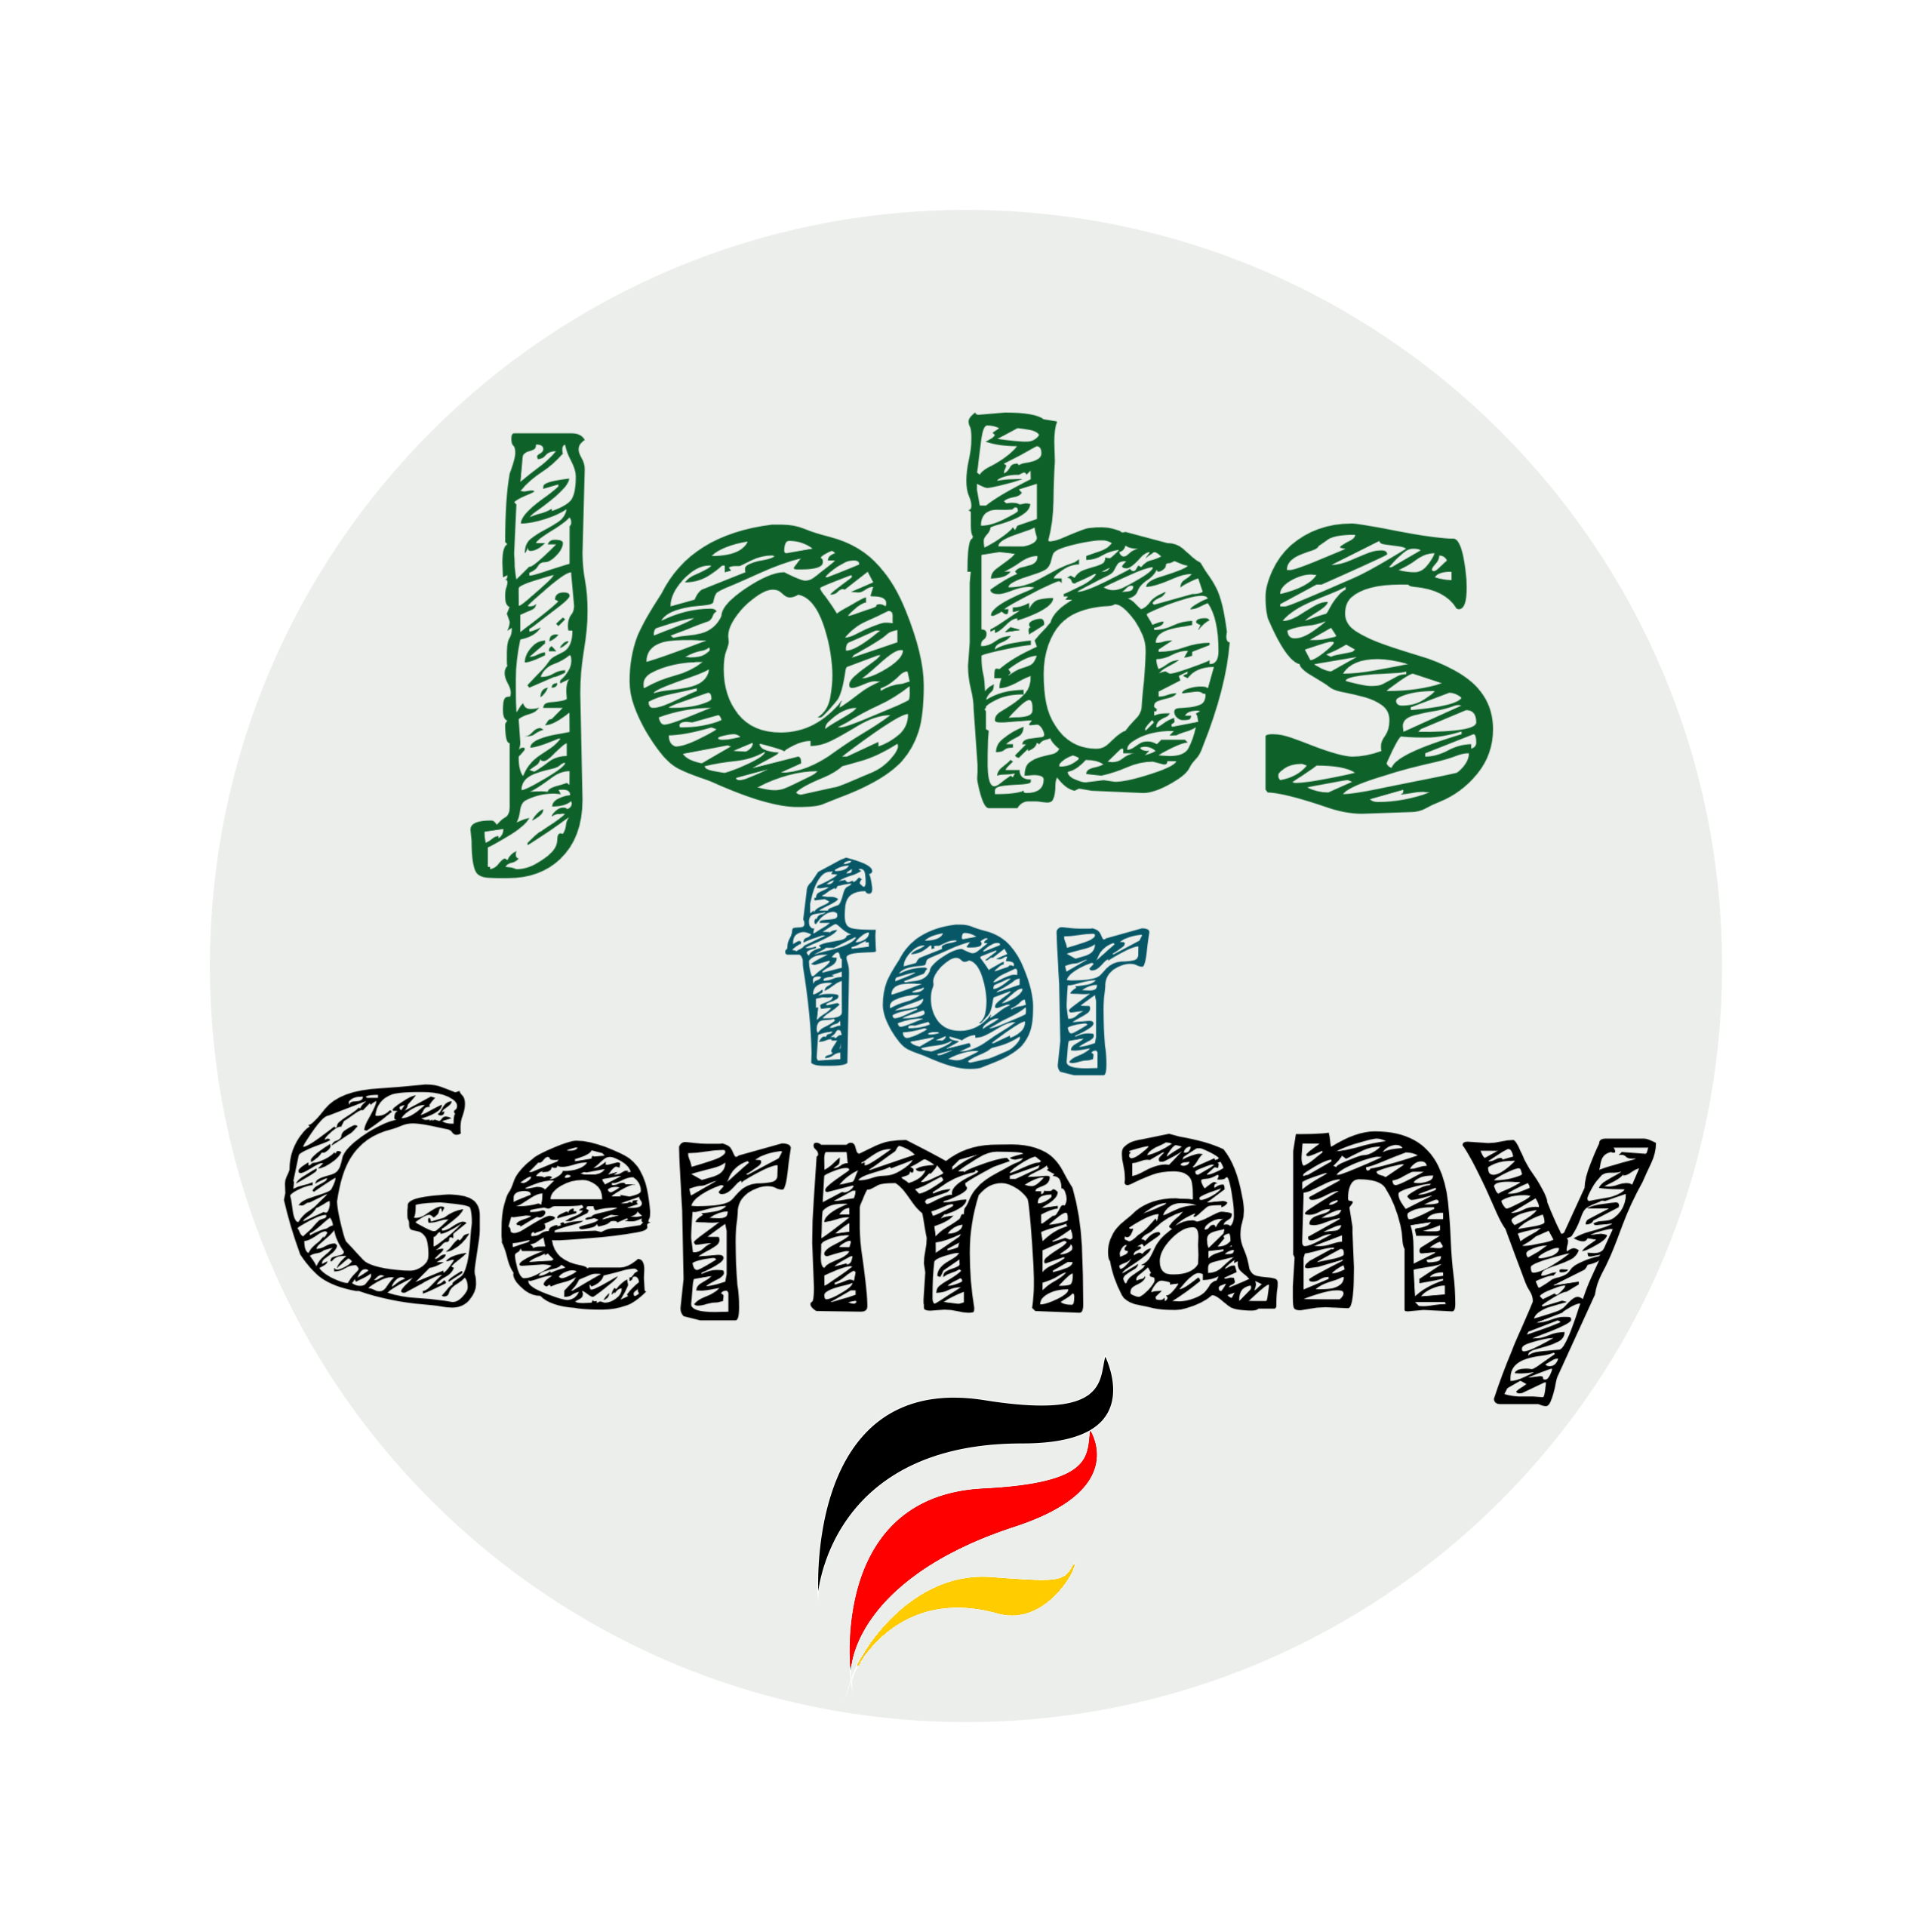 Jobs for Germany